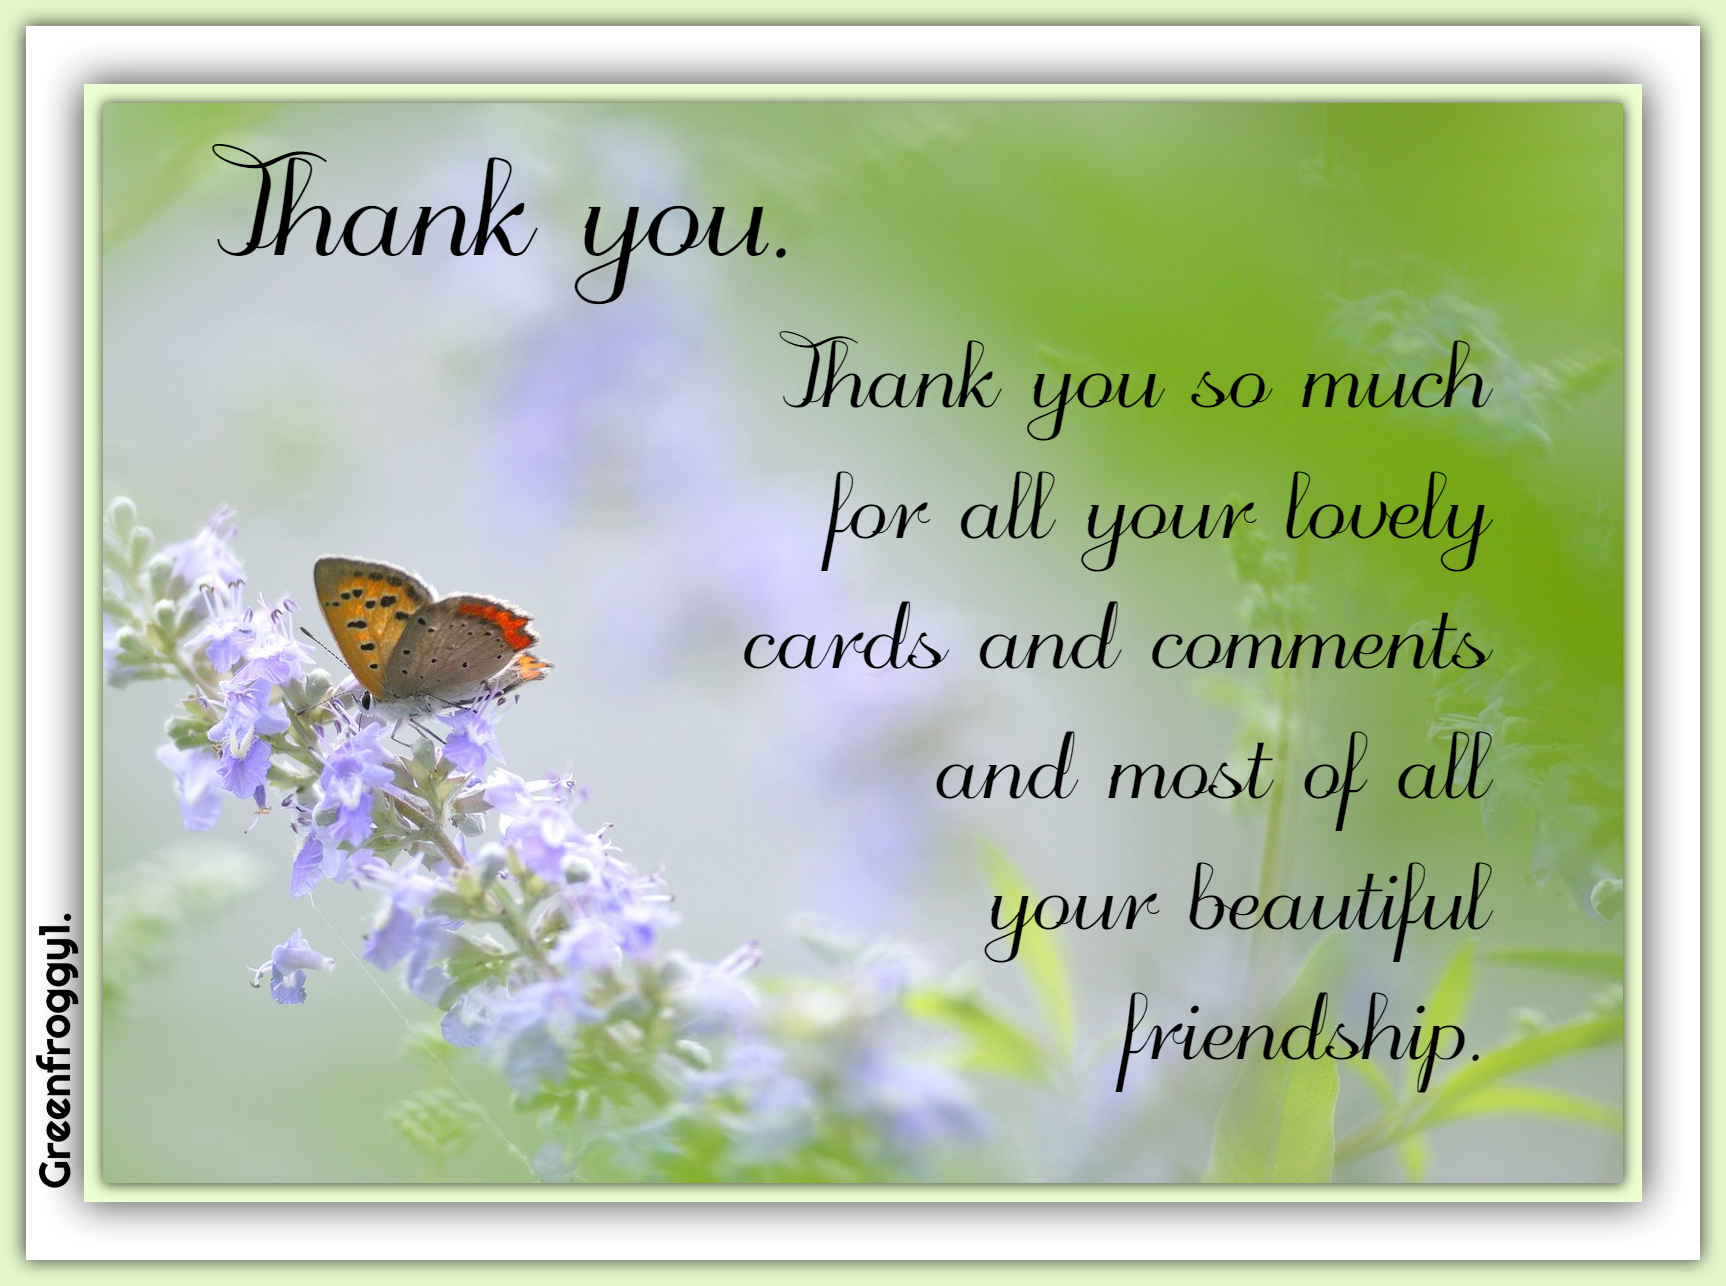 THANK YOU by GREENFROGGY1